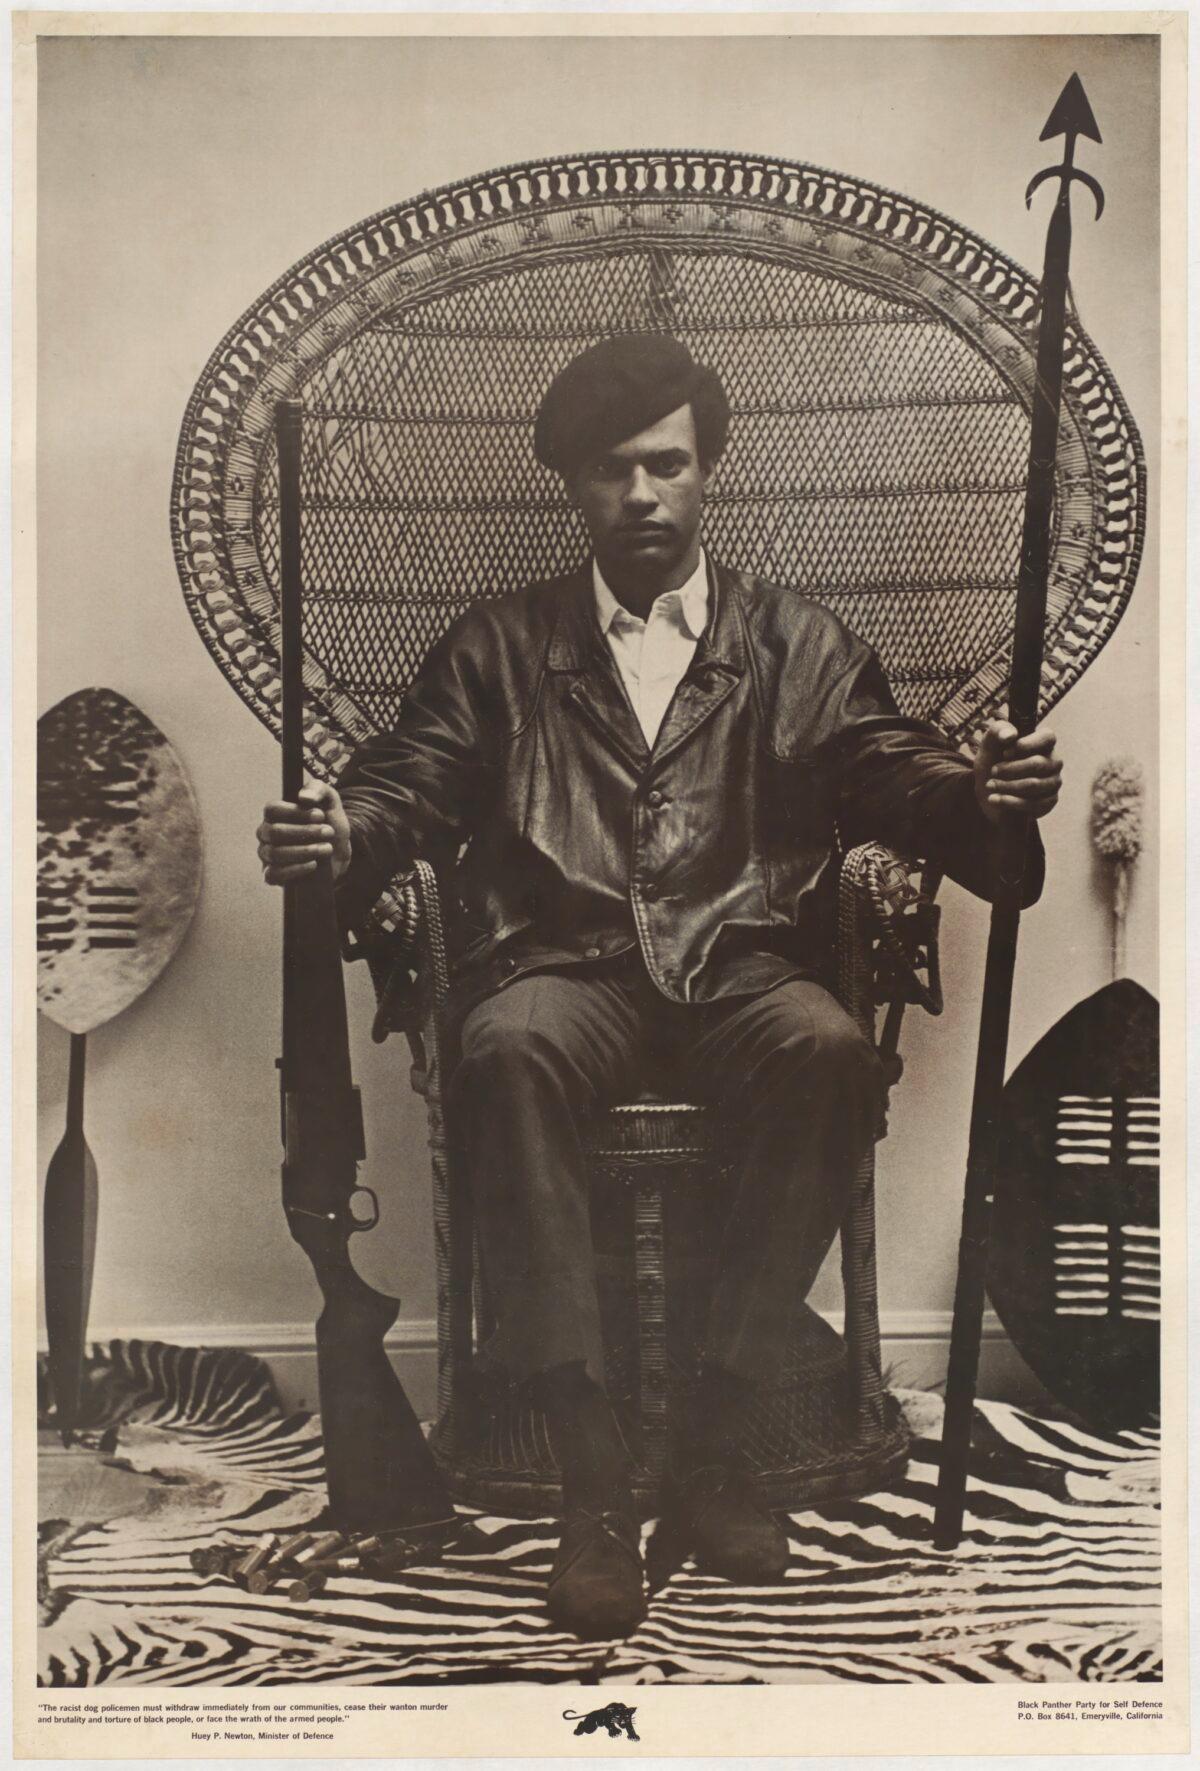 A poster of Black Panthers co-founder Huey Newton holding a rifle in his right hand and a spear in his left hand. Along the bottom of the print is the text: "The racist dog policemen must withdraw immediately from our communities, cease their wanton murder and brutality and torture of black people, or face the wrath of the armed people." (Public Domain)